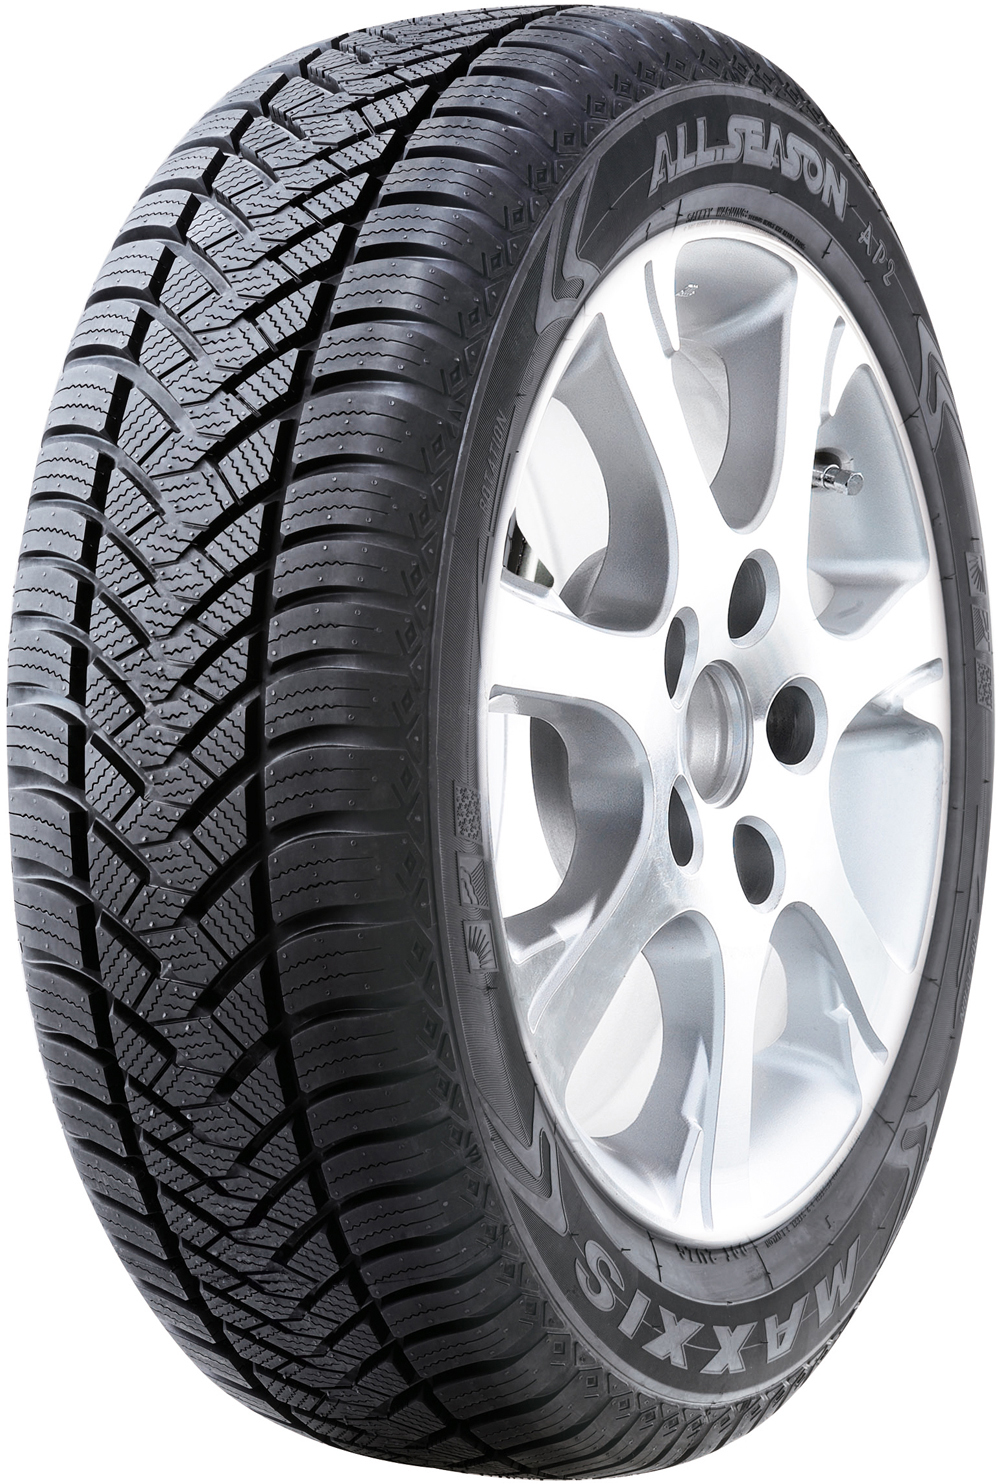 Anvelope auto MAXXIS AP2 XL 195/65 R14 93H